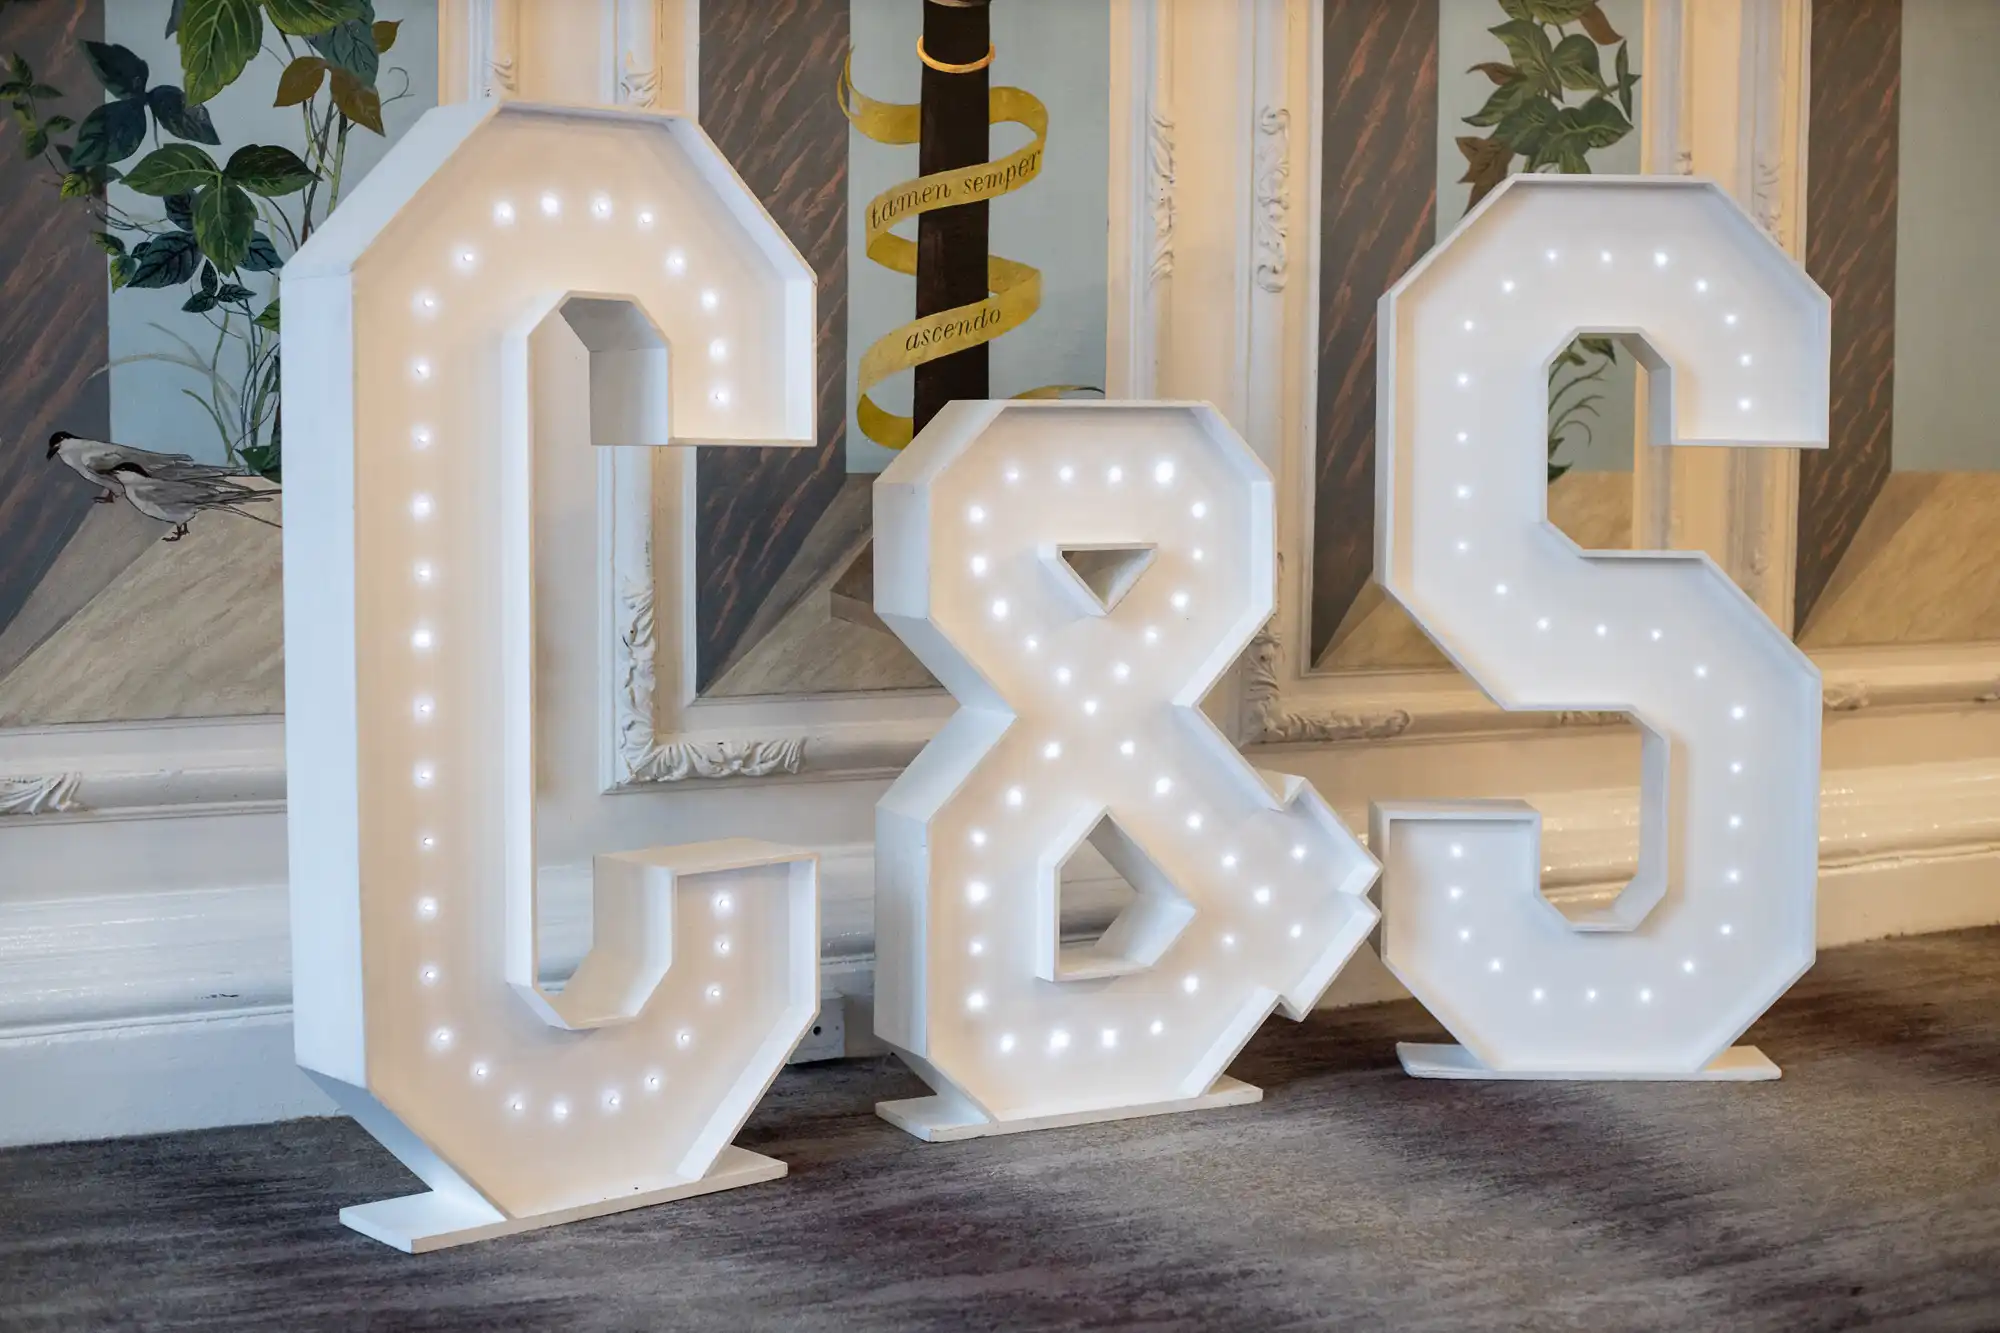 Three large illuminated white letters, "C," "&," and "S," are displayed on a carpeted floor against a decorative wall background.